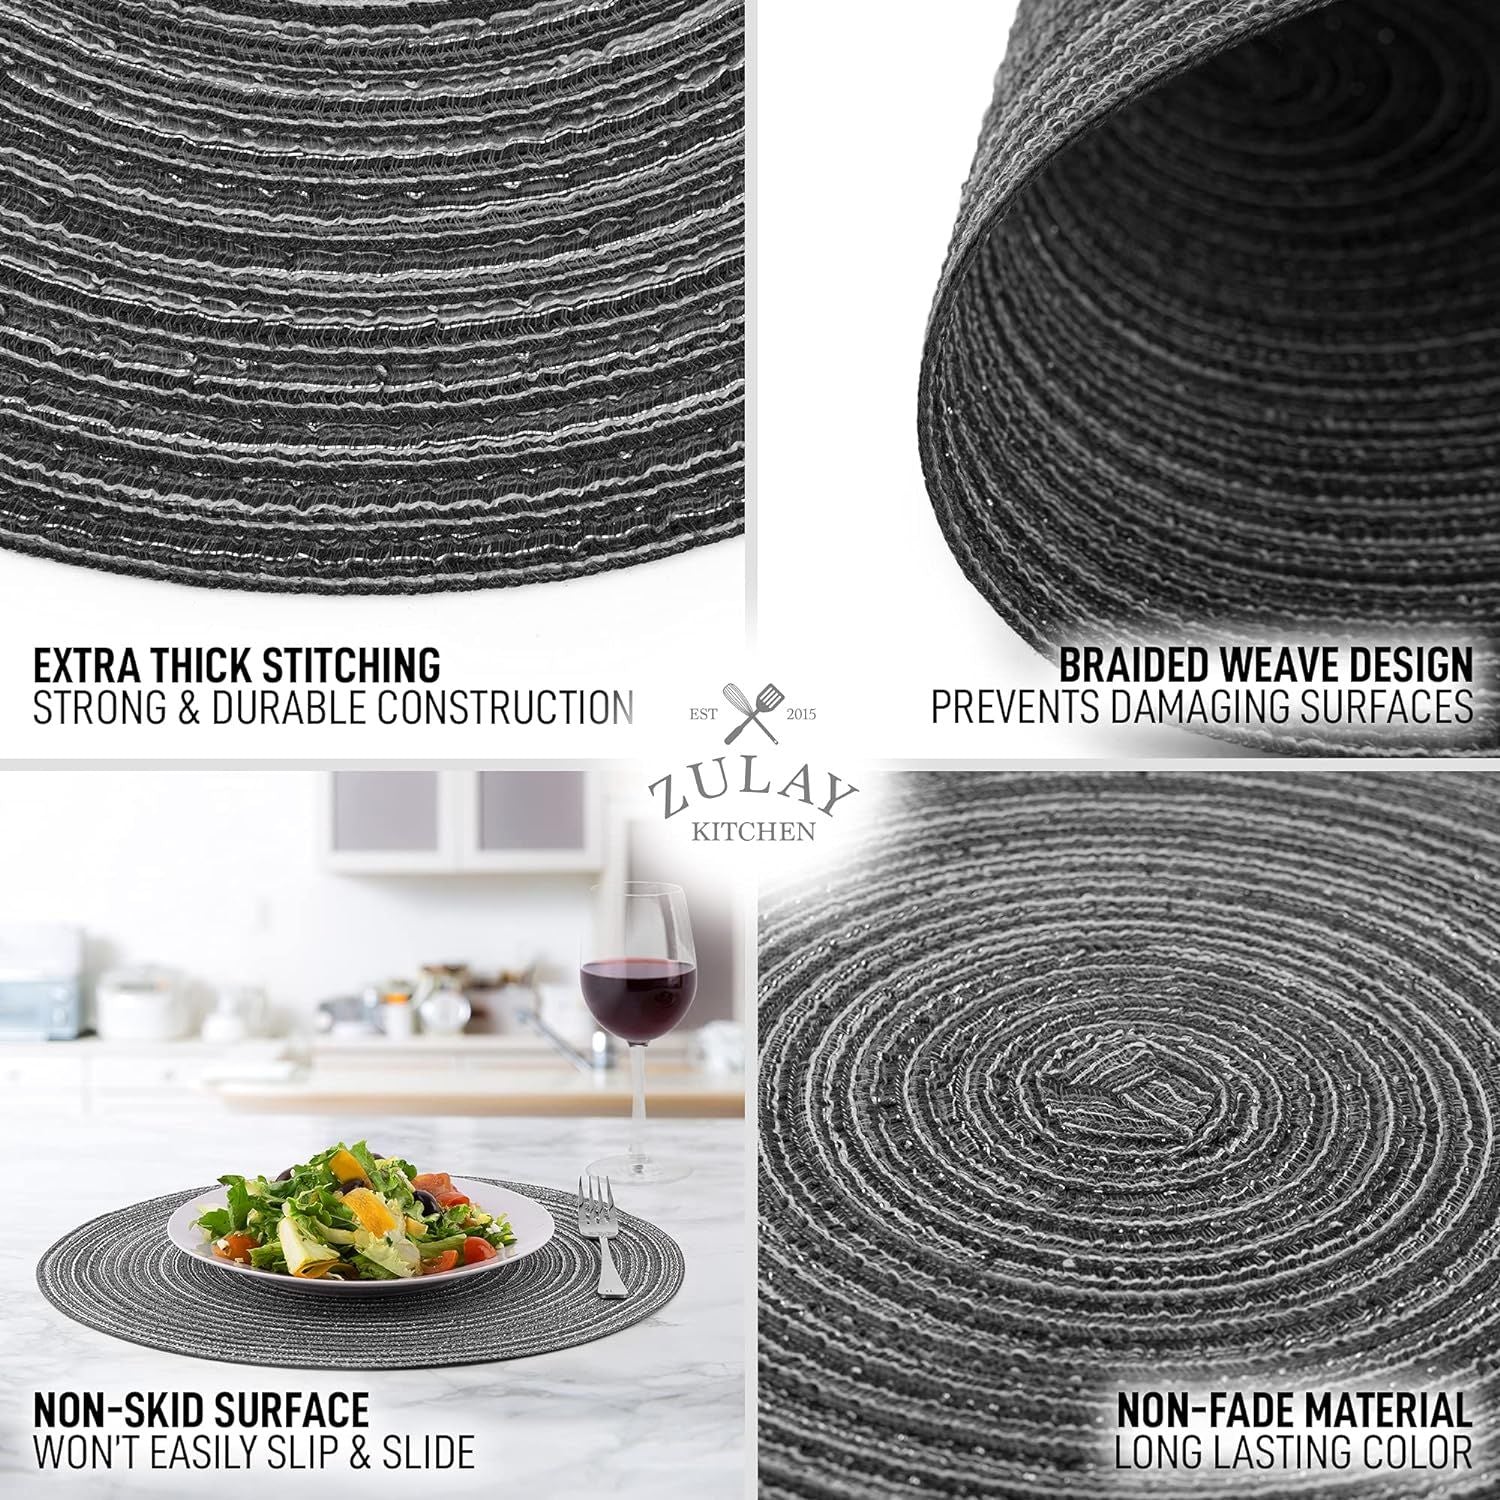 Round Braided Placemats - Set of 6